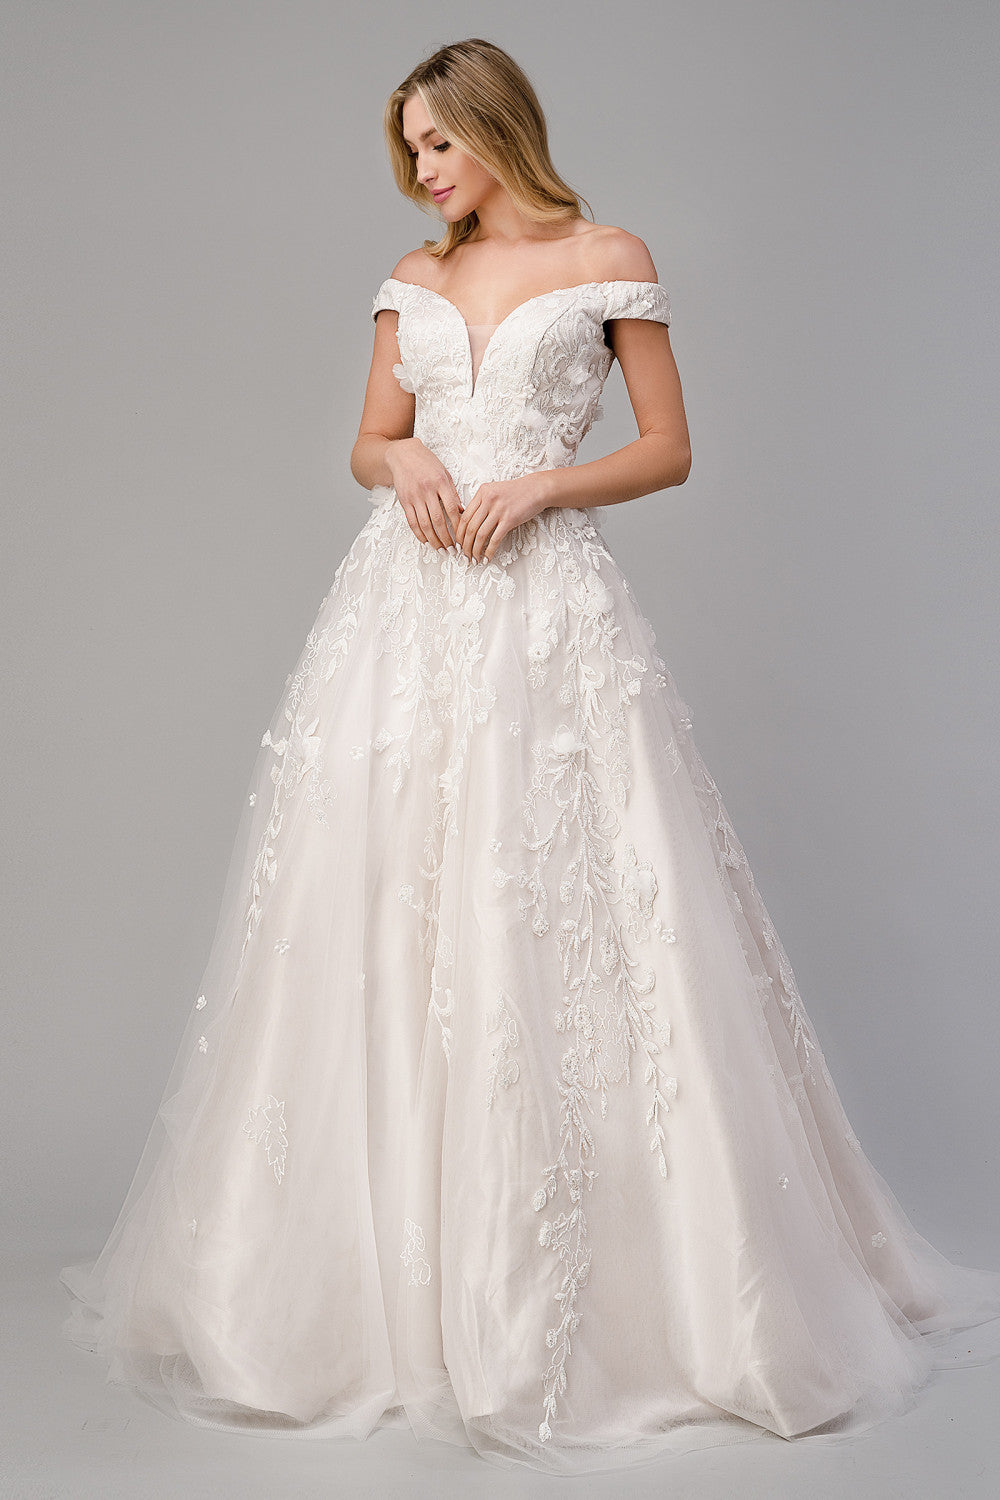 Off Shoulder Embroidered Bridal Gown By Andrea And Leo -A1027W